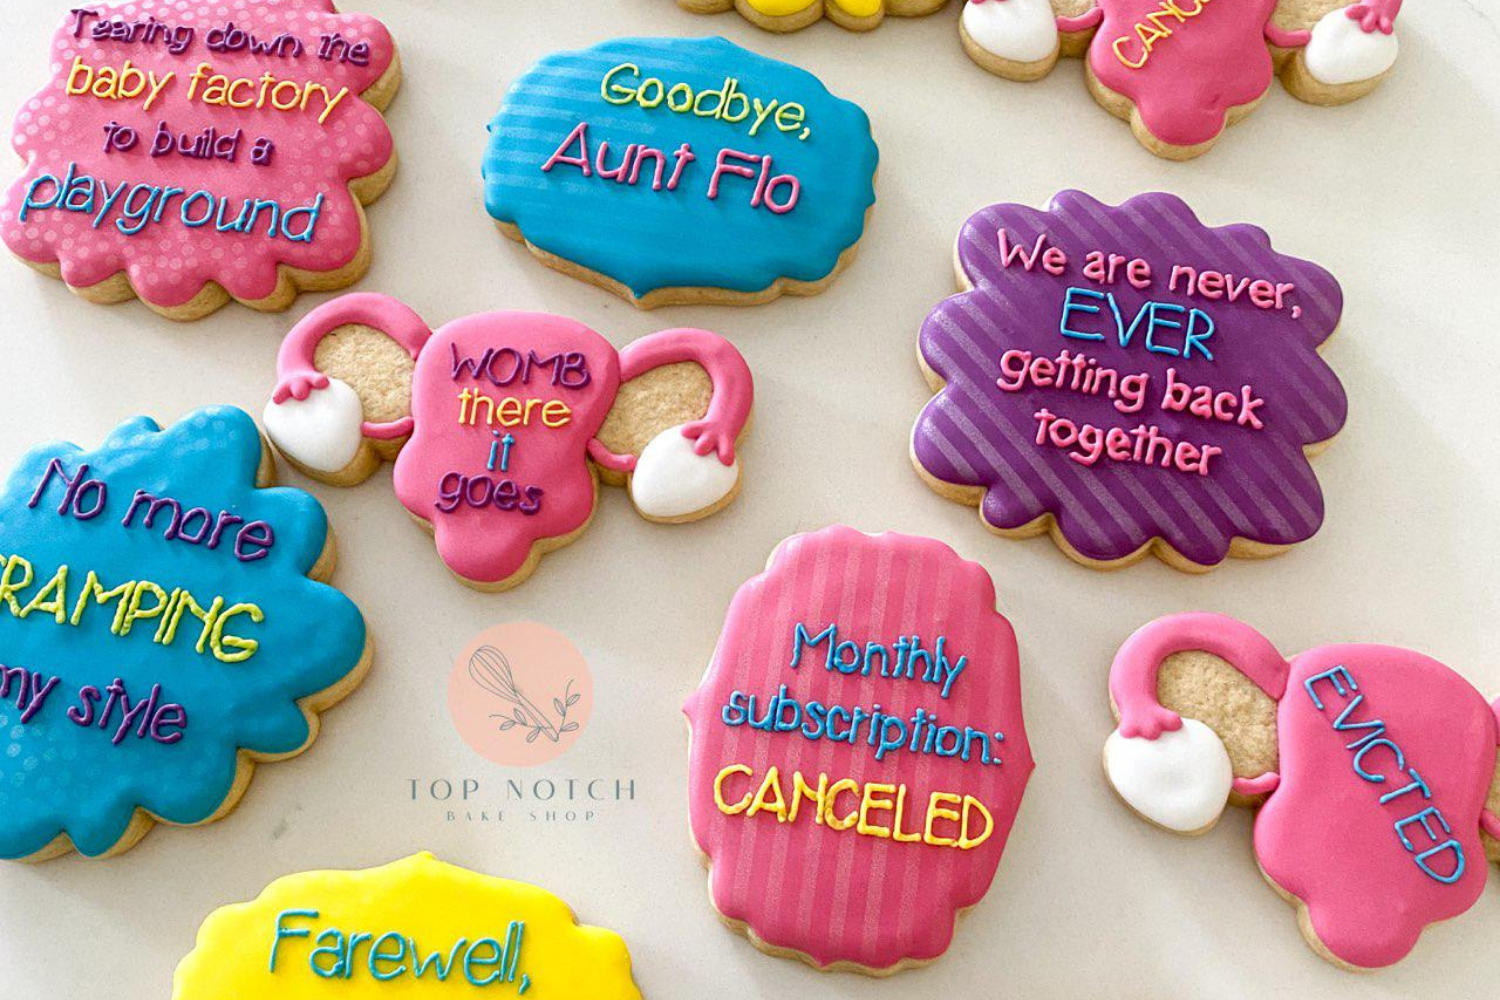 hysterectomy-celebration-cookies.png